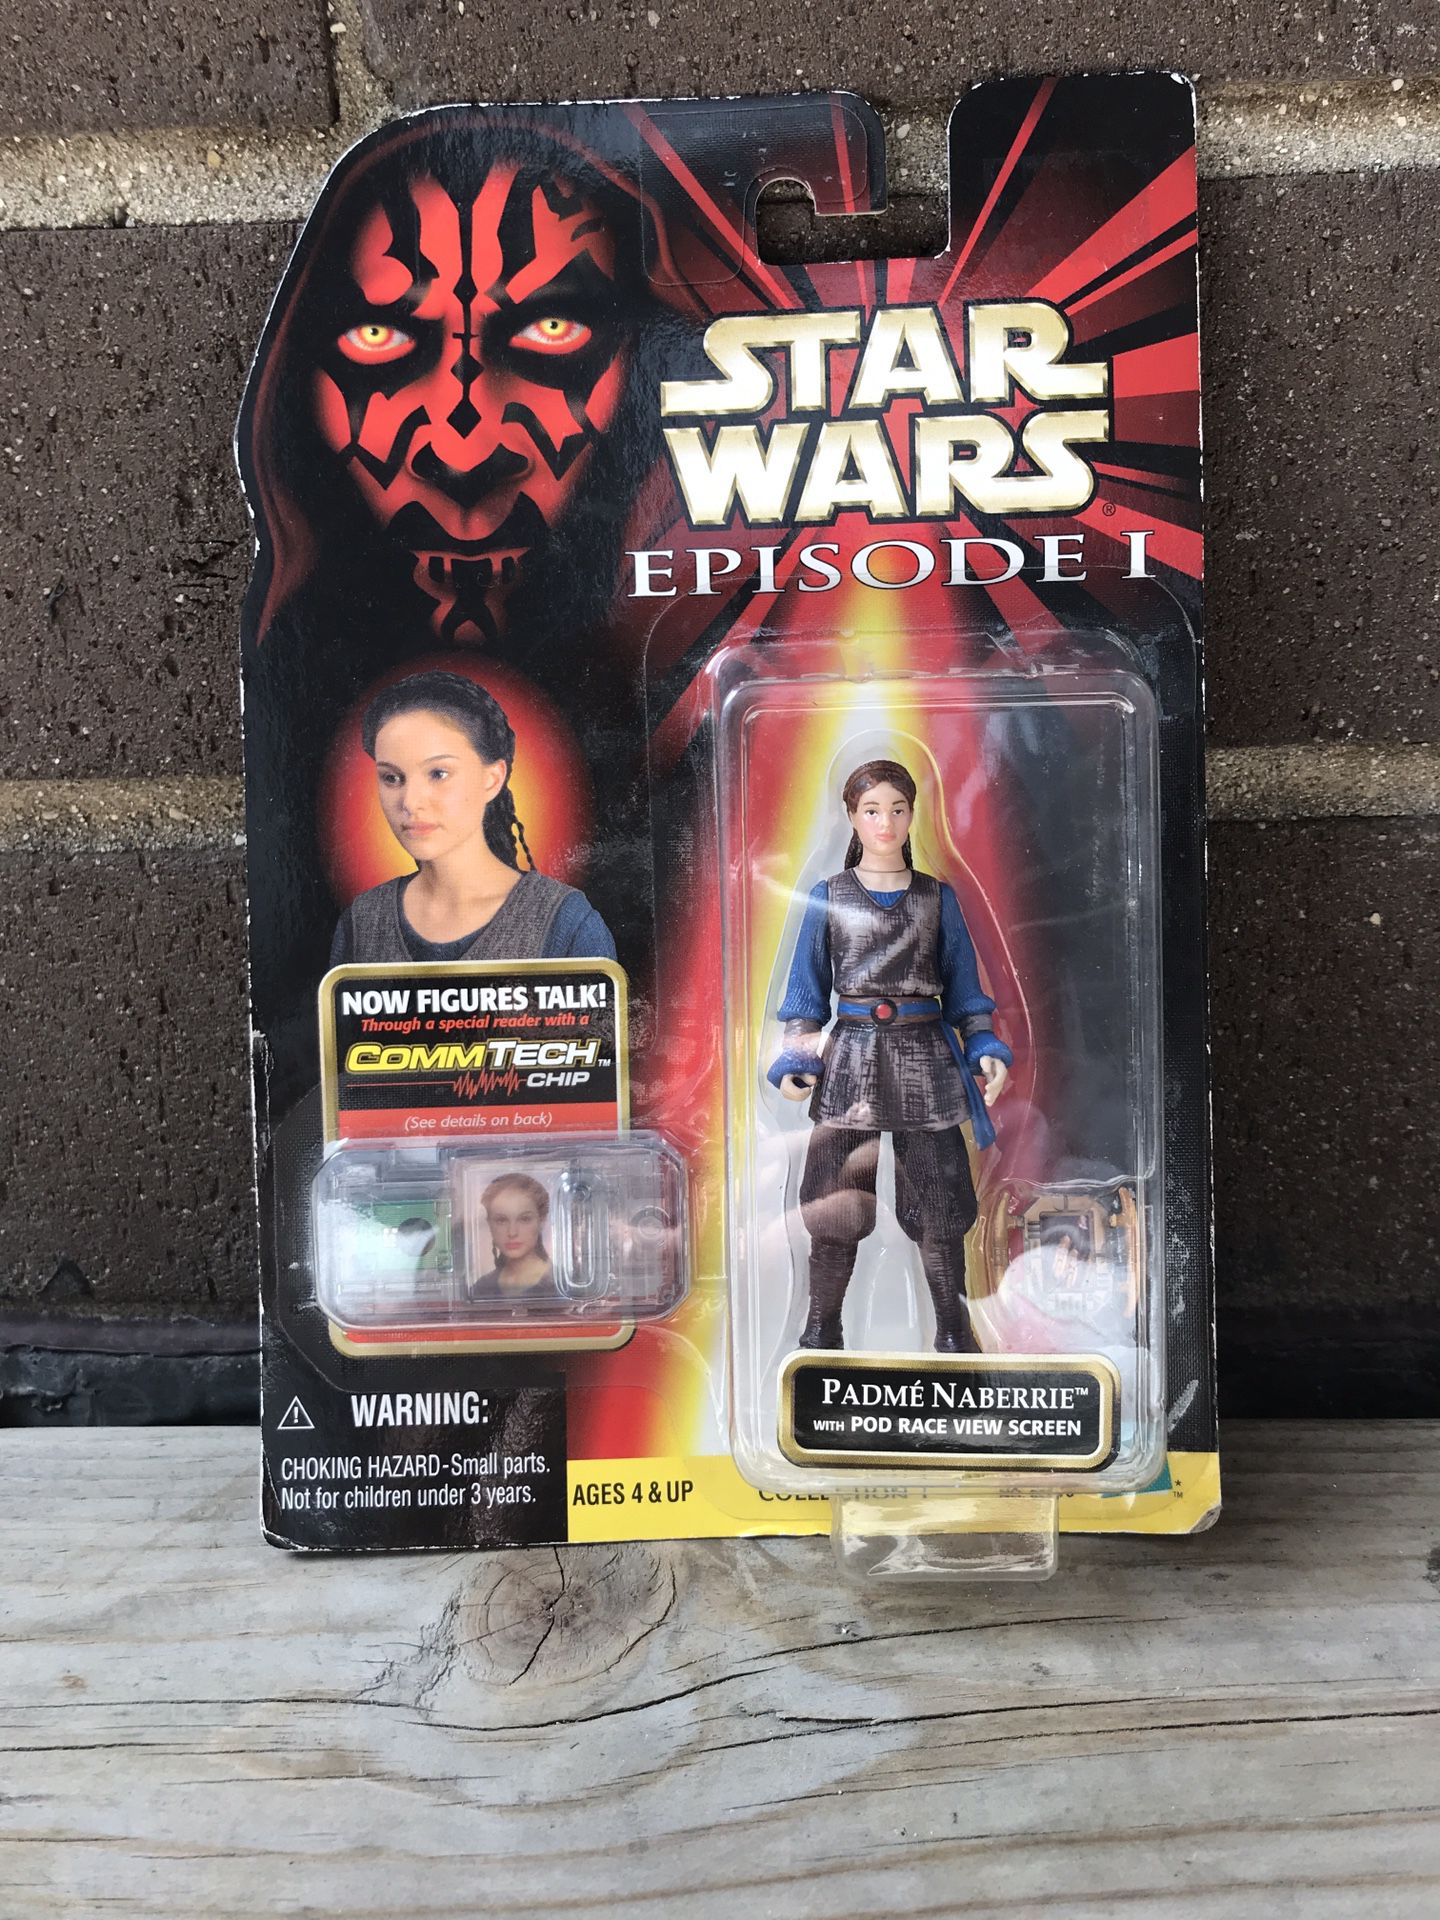 Collection 1 Star Wars episode 1 commtech Padme Naberrie 1998 action figure